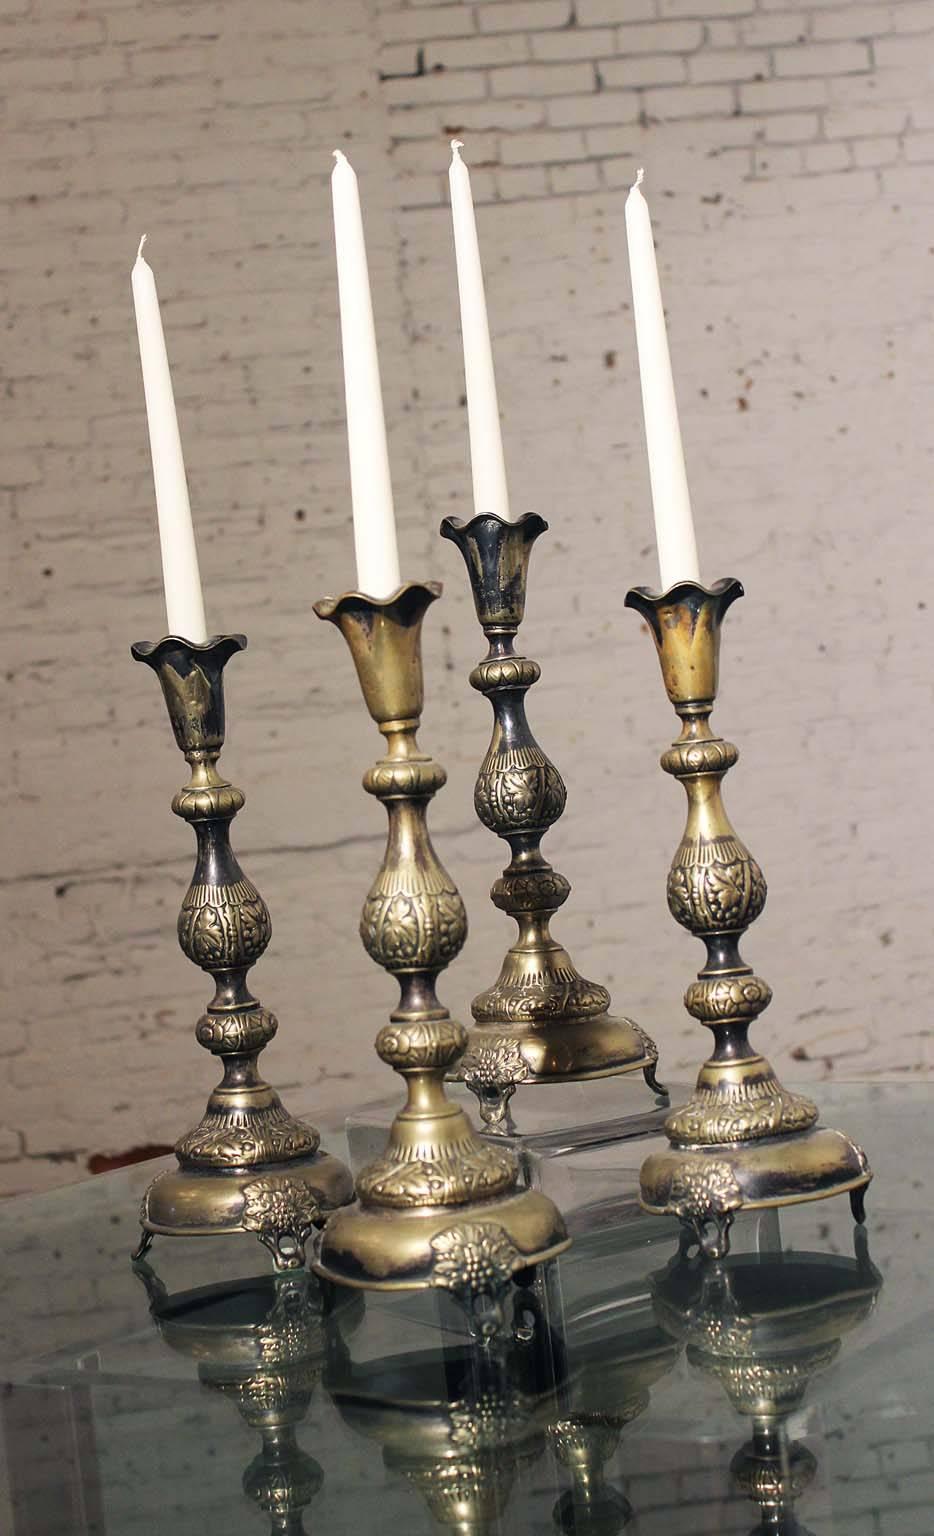 Set of four Sabbath candlesticks with gorgeous age patina. Very aged and beautiful.

Incredible set of four circa 19th century Sabbath Russo-Polish candlesticks. They are each marked with the inscription Fraget N Plaque (translated means: Fraget